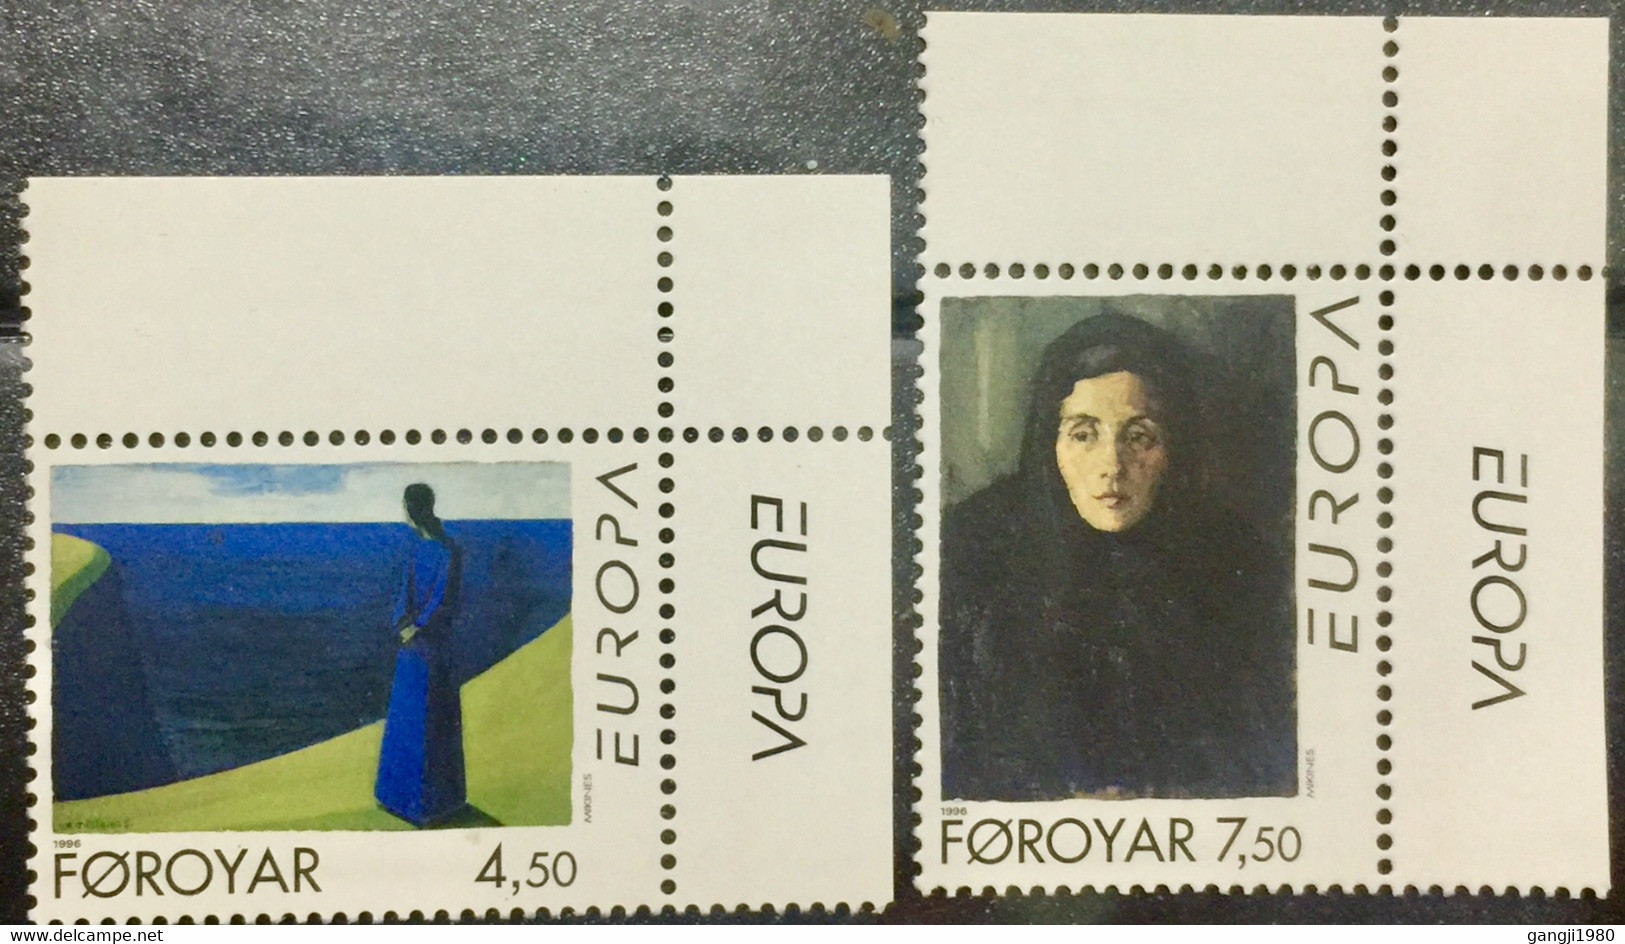 FAROE ISLANDS  1996 MNH STAMP ON EUROPA,FAMOUS WOMEN  2 DIFFERENT  STAMPS - Islas Faeroes